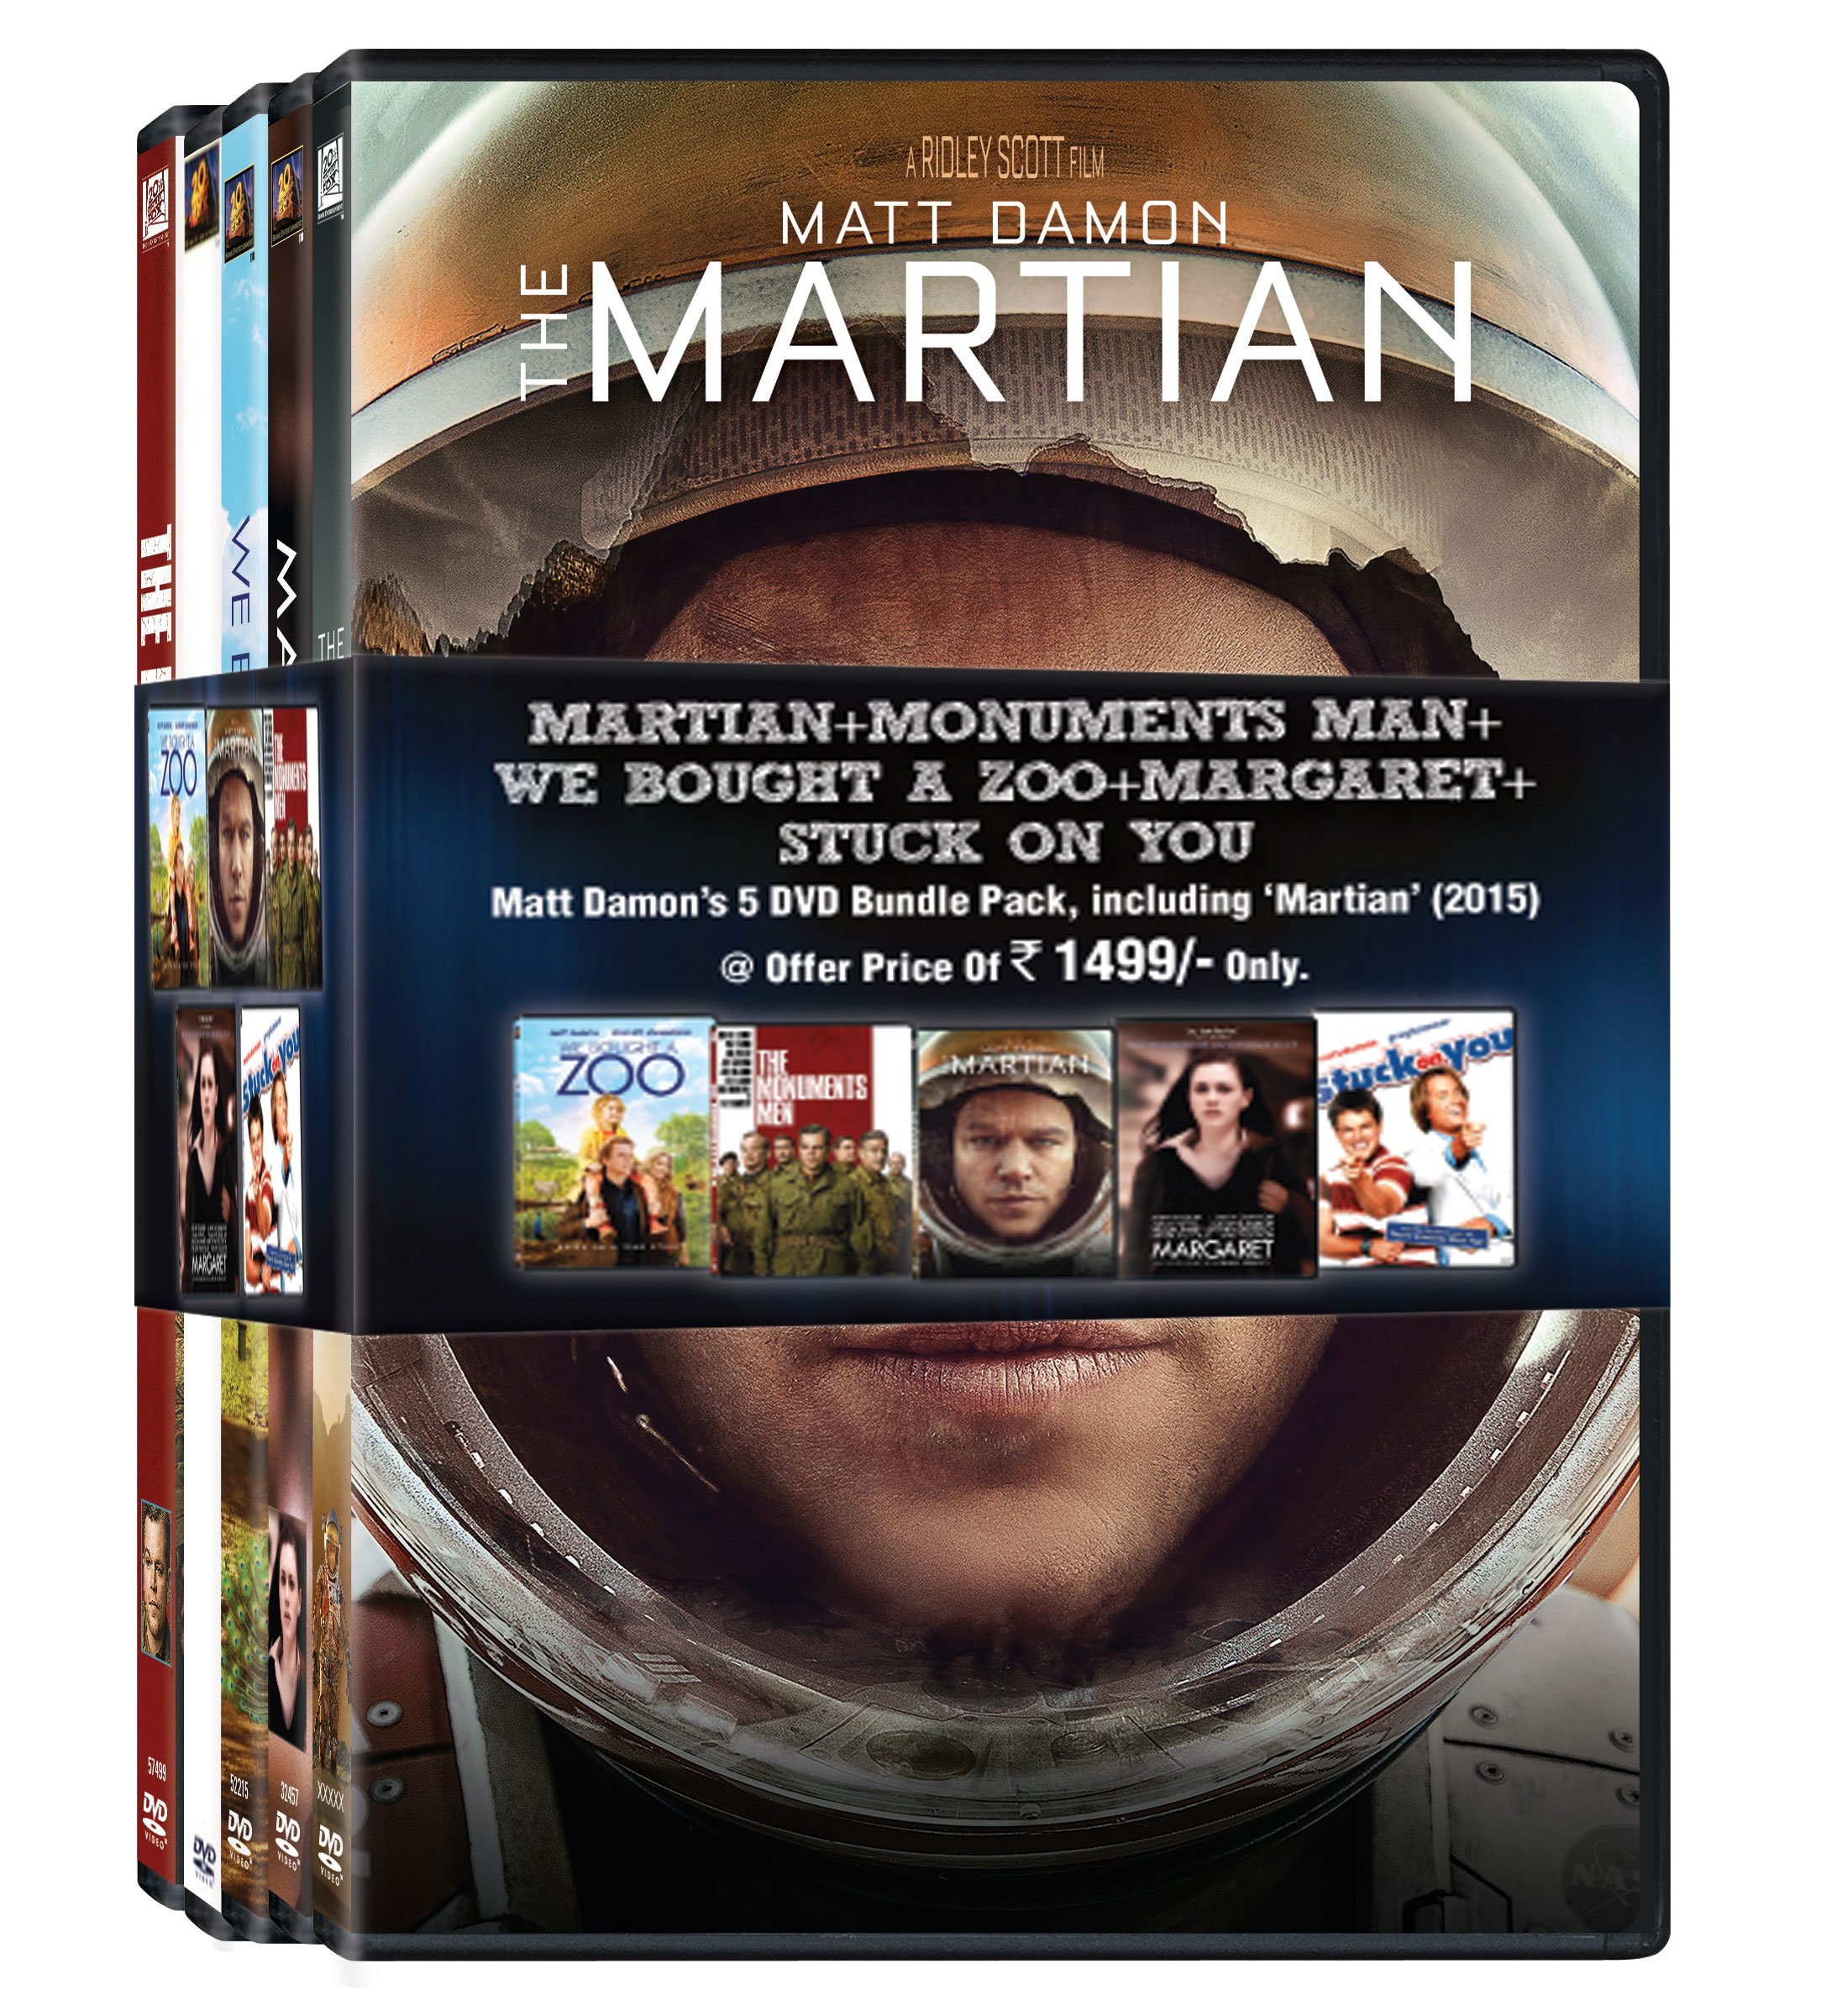 matt-damon-5-movies-collection-the-martian-the-monuments-men-we-bought-a-zoo-margaret-stuck-on-you-5-disc-box-set